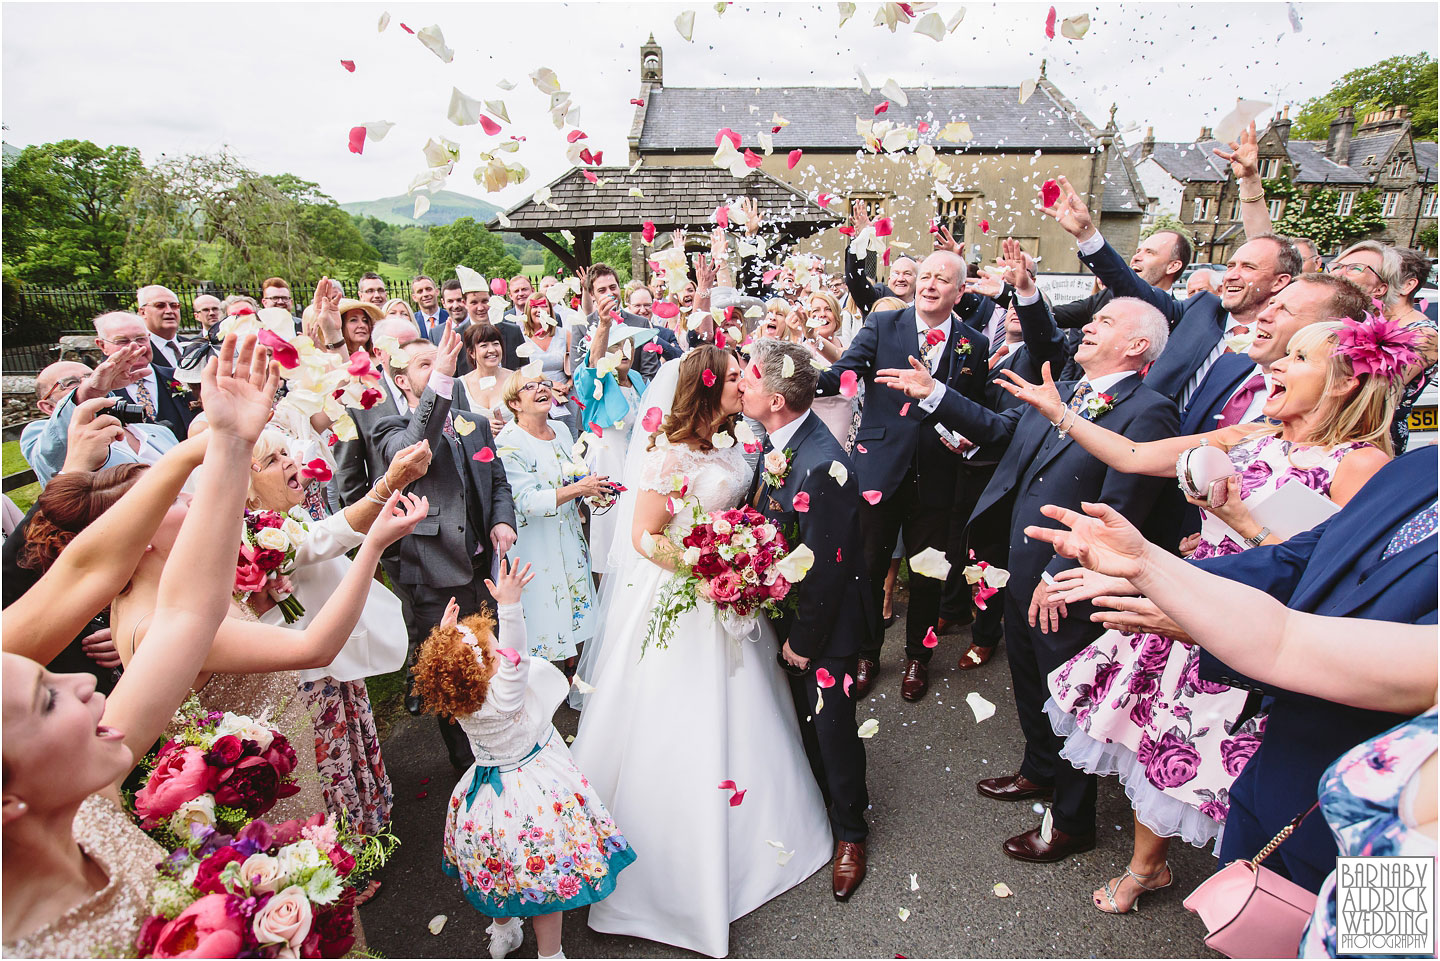 A bride and groom kiss under colourful confetti at their wedding at The Inn at Whitewell in Lancashire